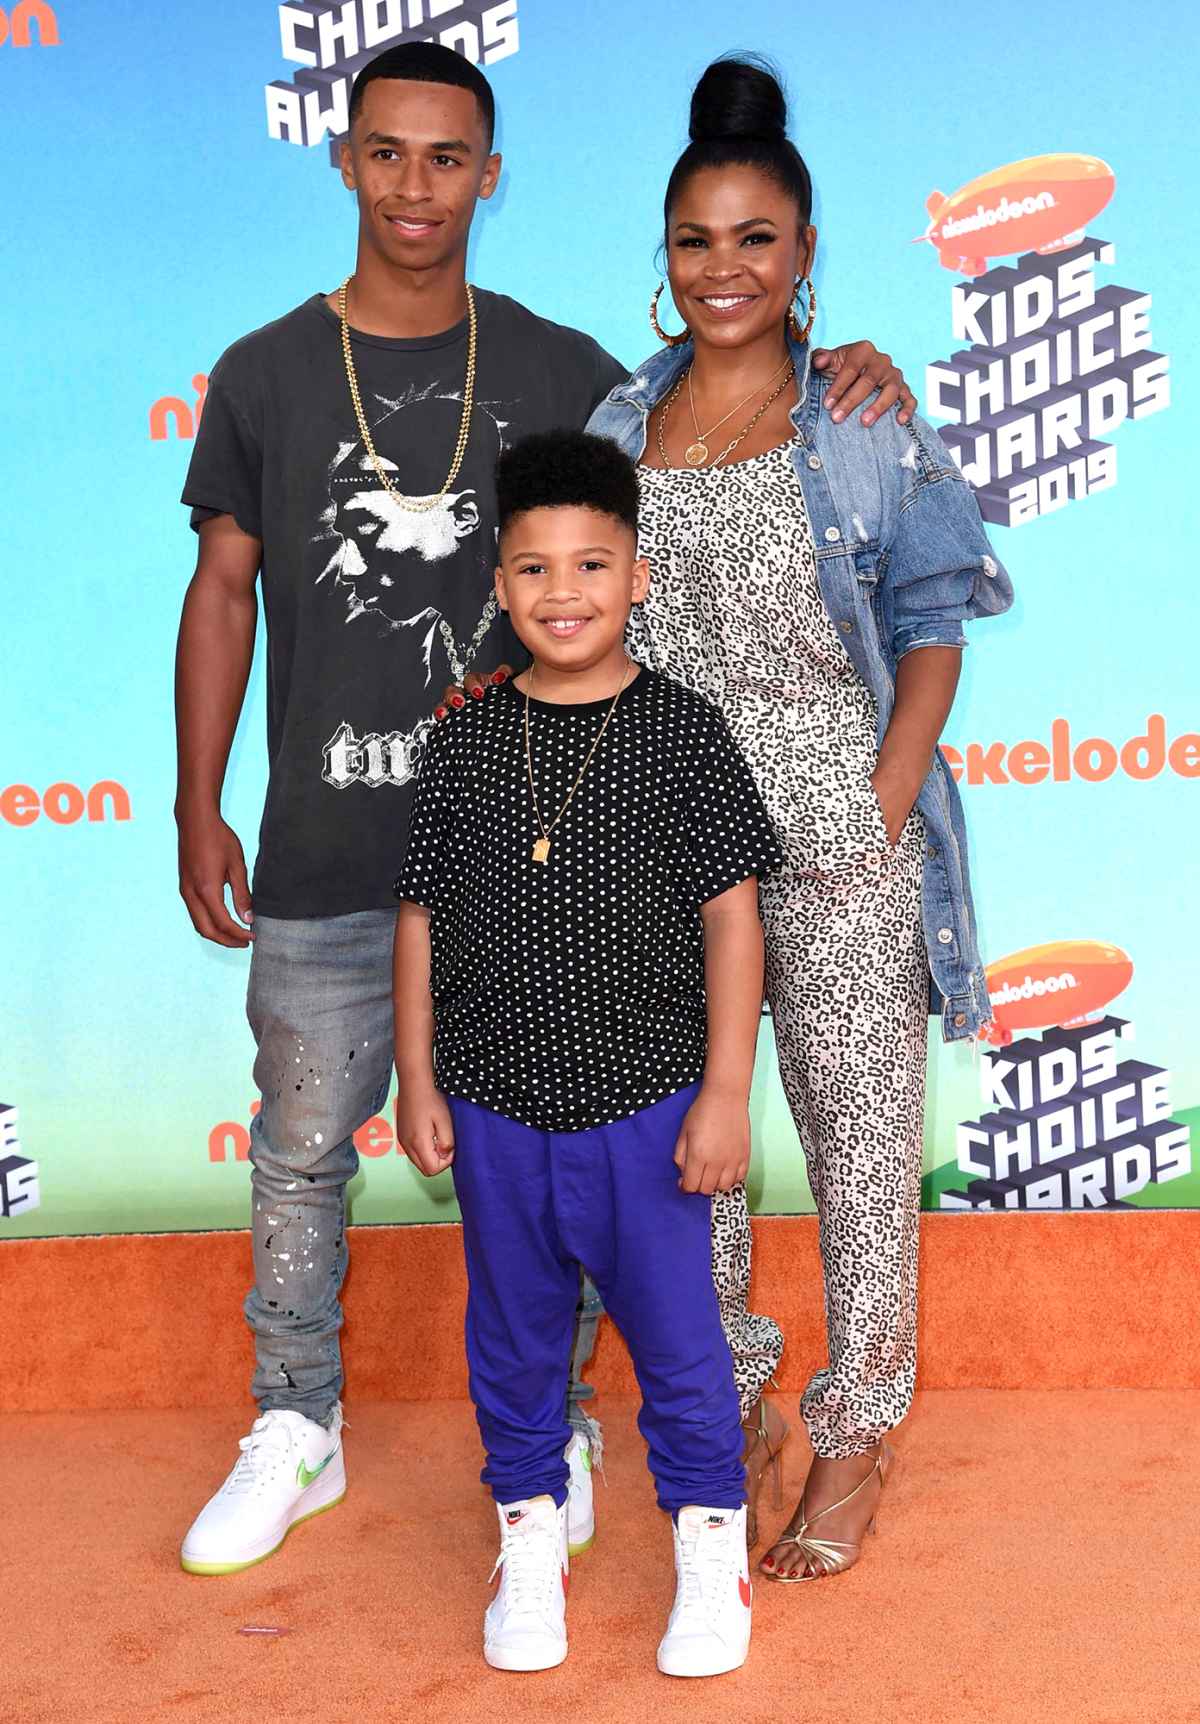 NIA LONG POSES WITH HER KIDS IN CUTE PHOTO: 'RIDE OR DIE